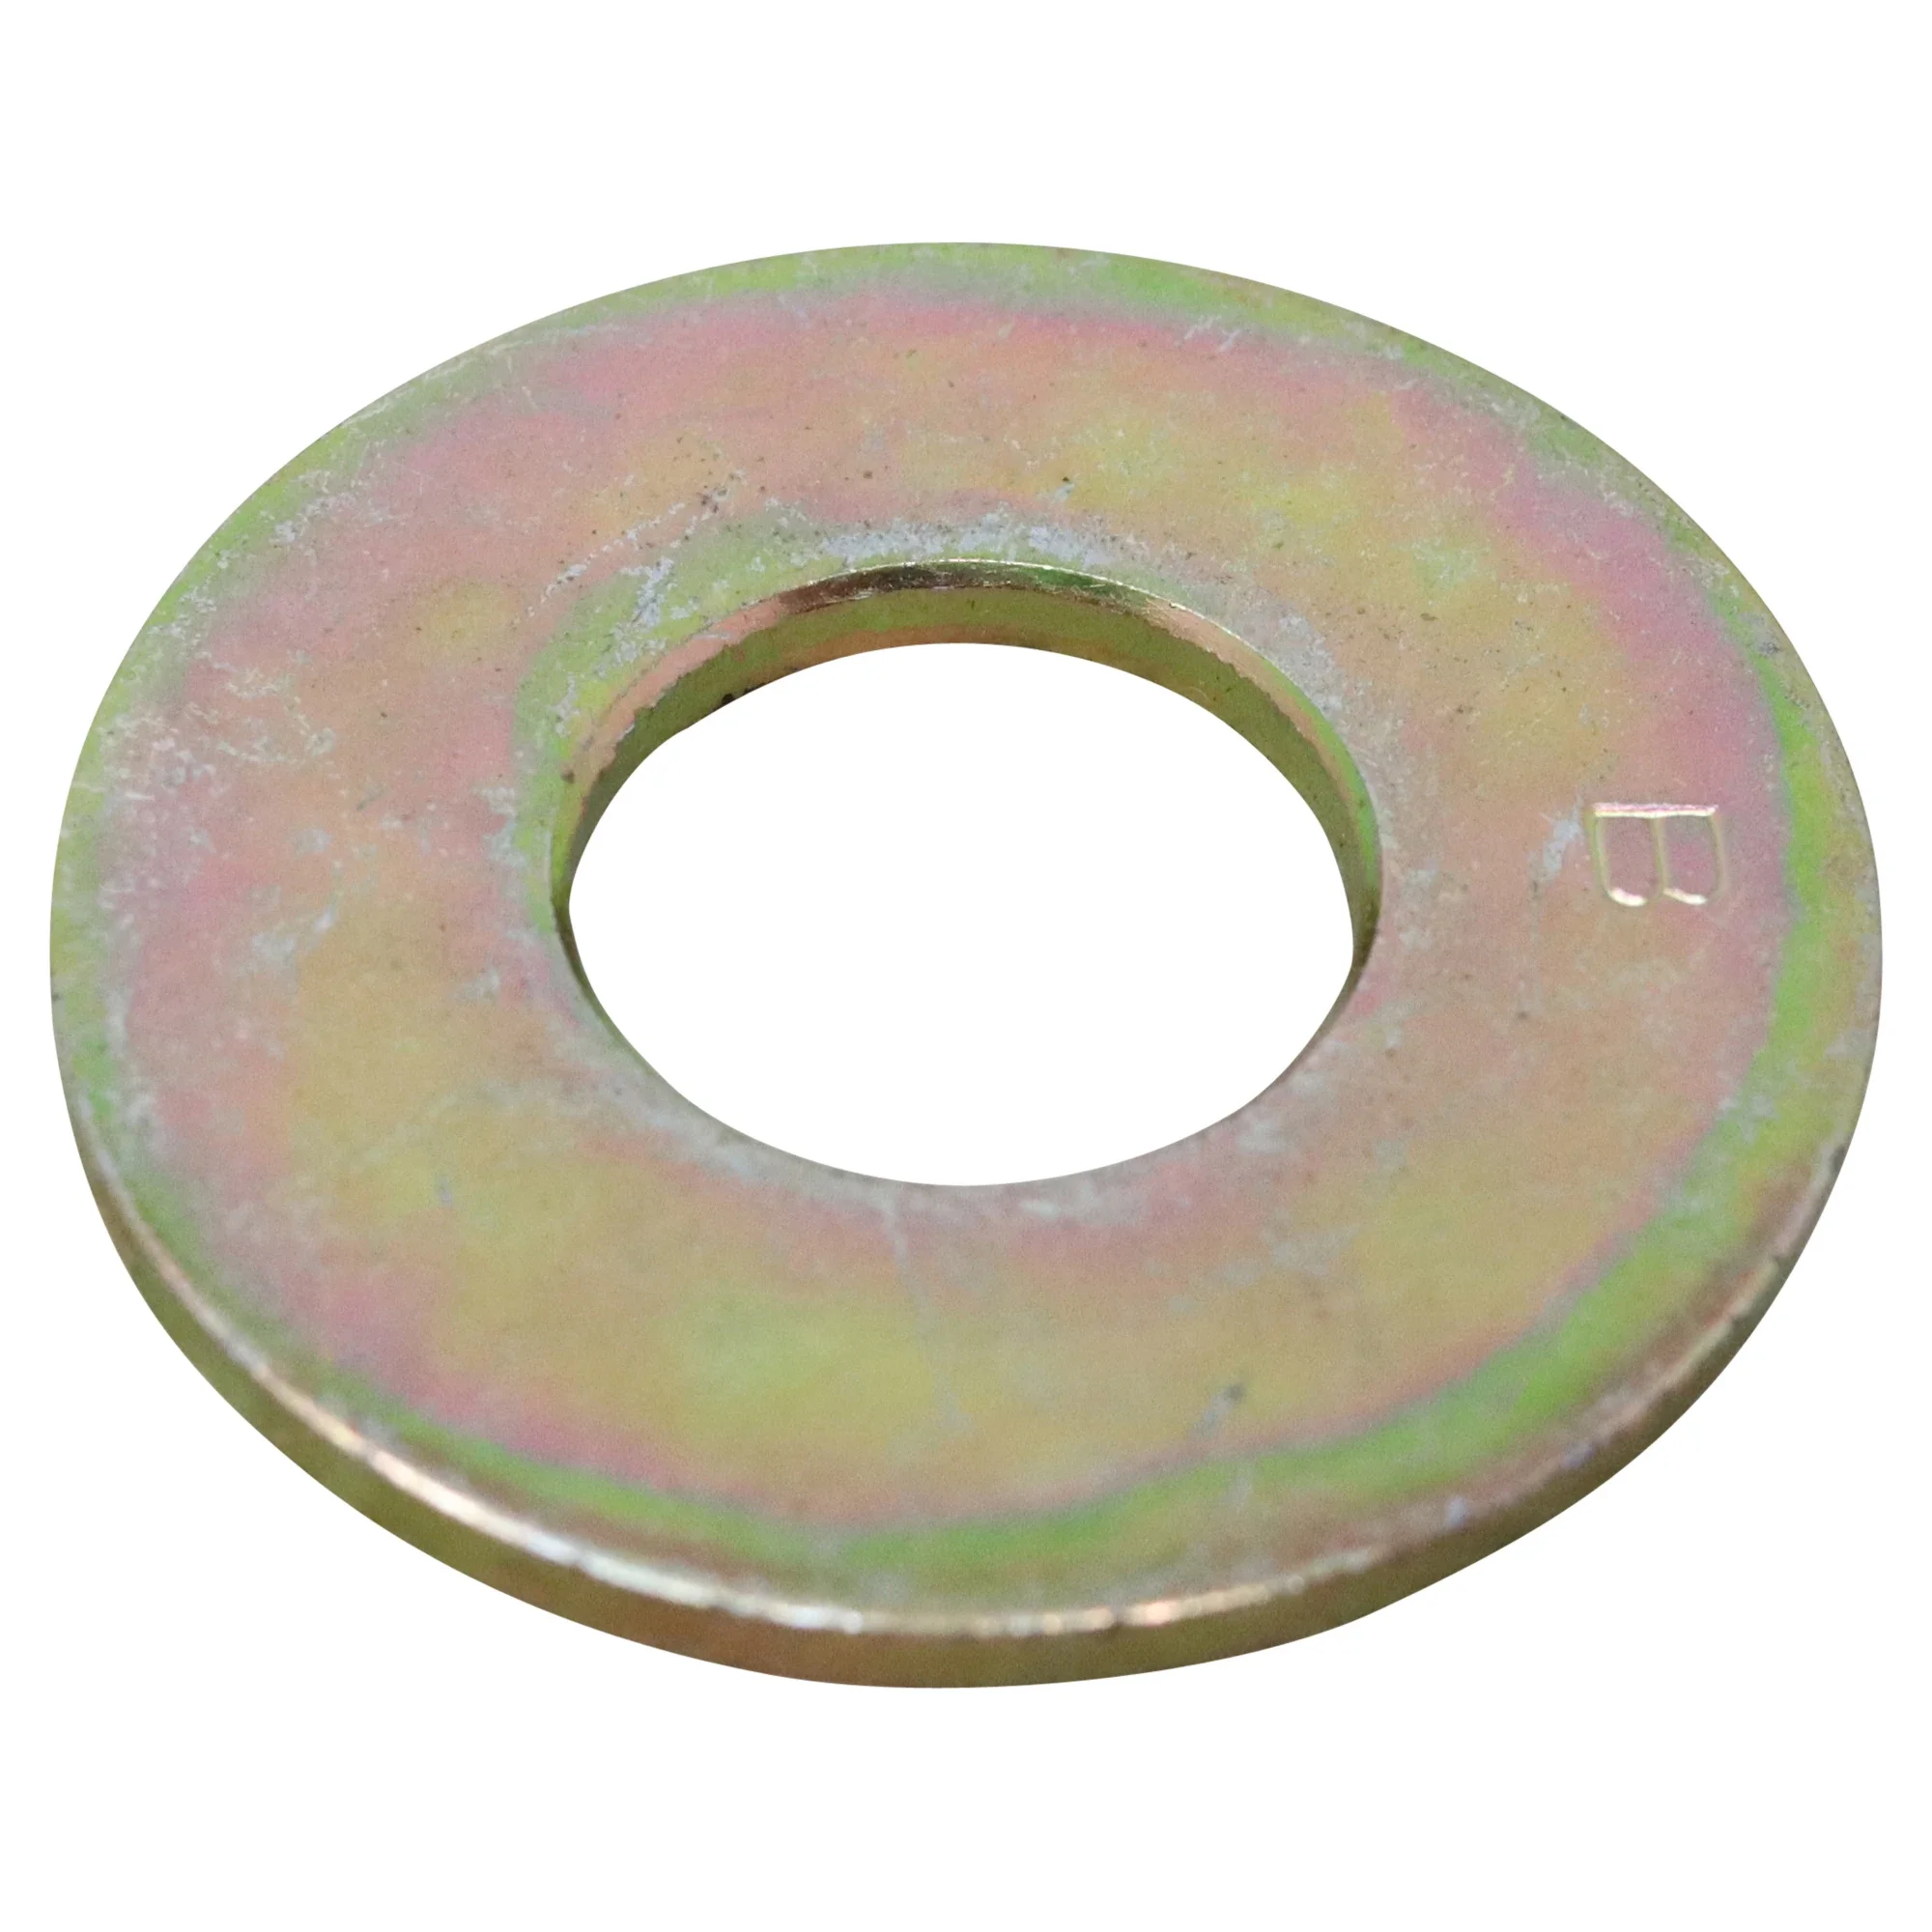 Wastebuilt® Replacement for Heil 1/2" Standard Flat Washer